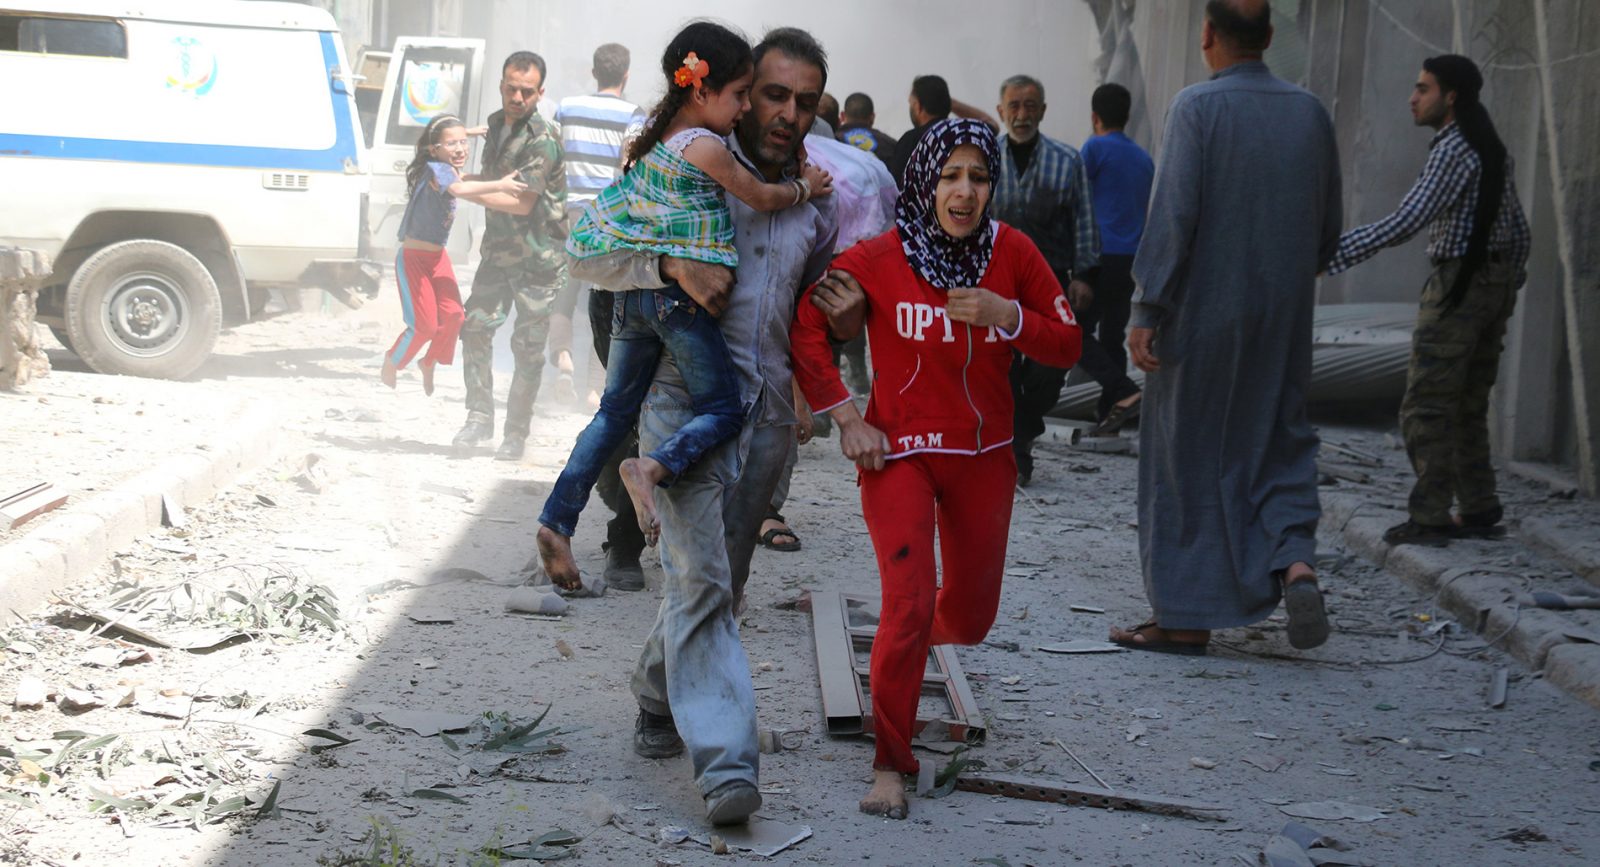 A family run through rubble in Syria searching for safety